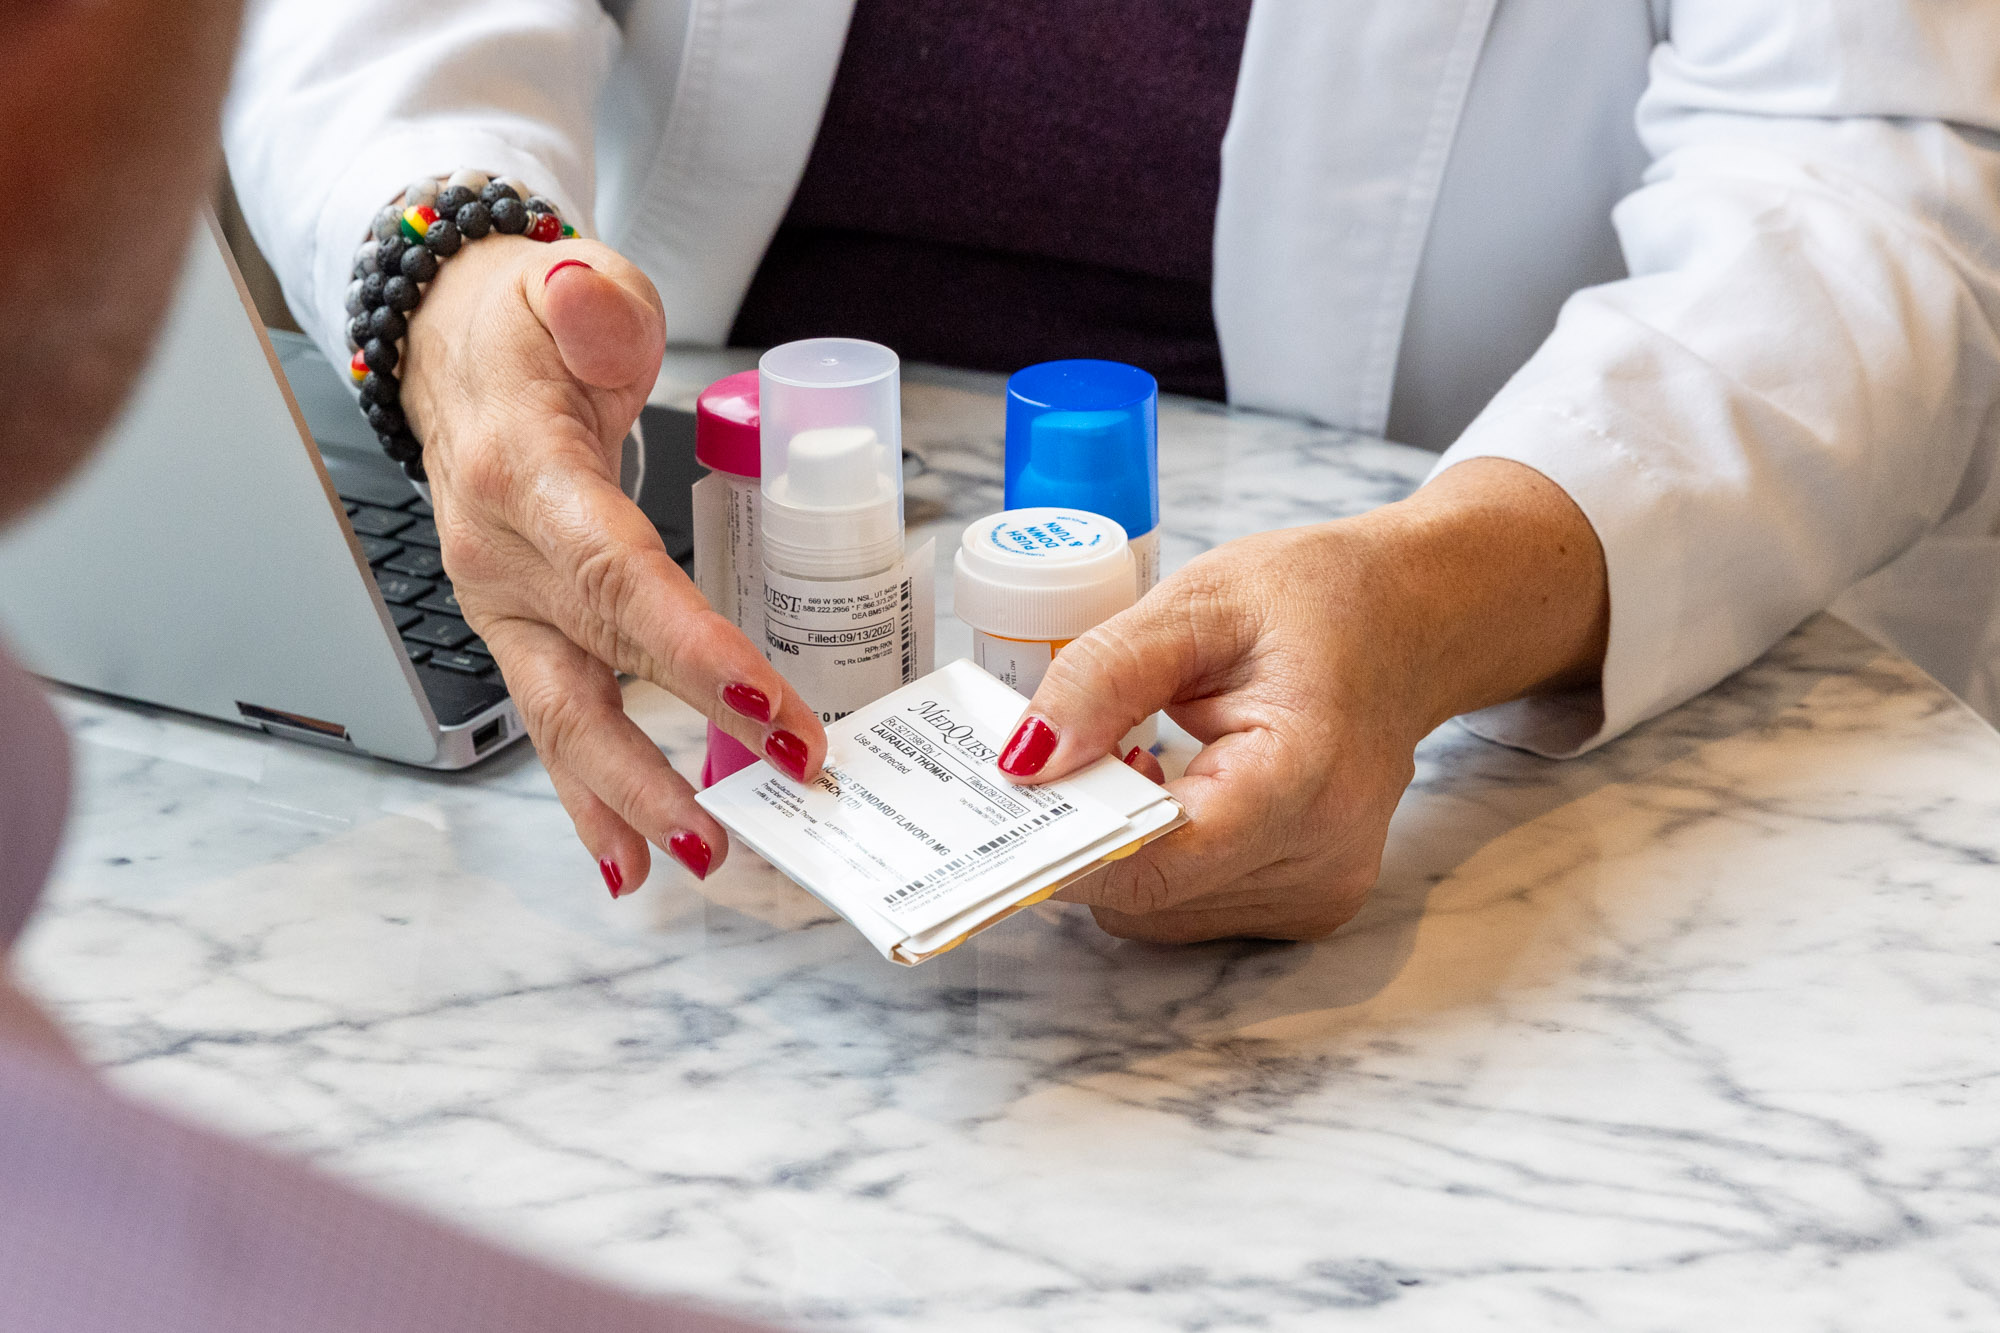 a doctor offers hormone replacement medication to patient